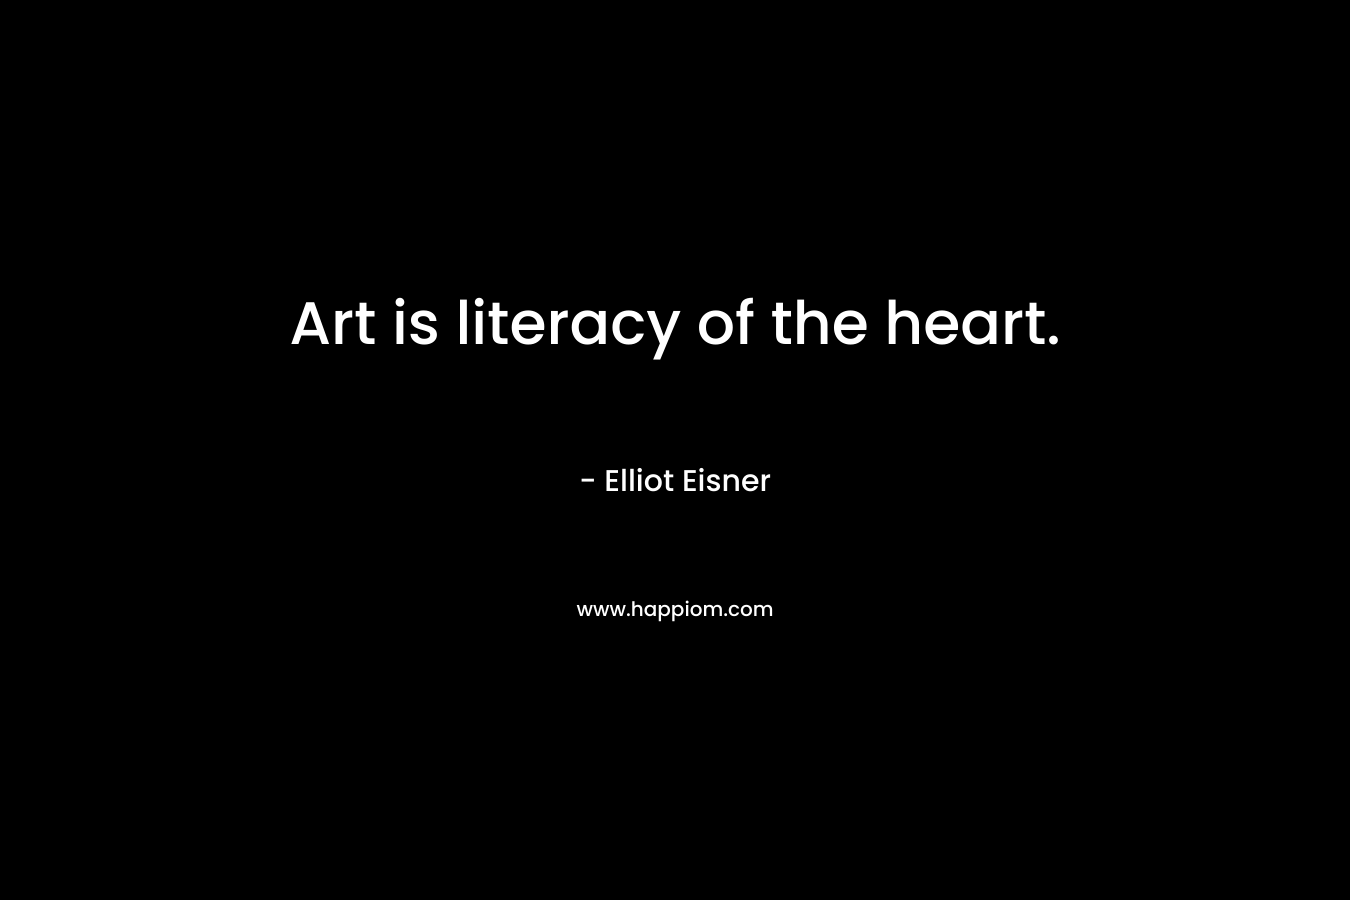 Art is literacy of the heart.